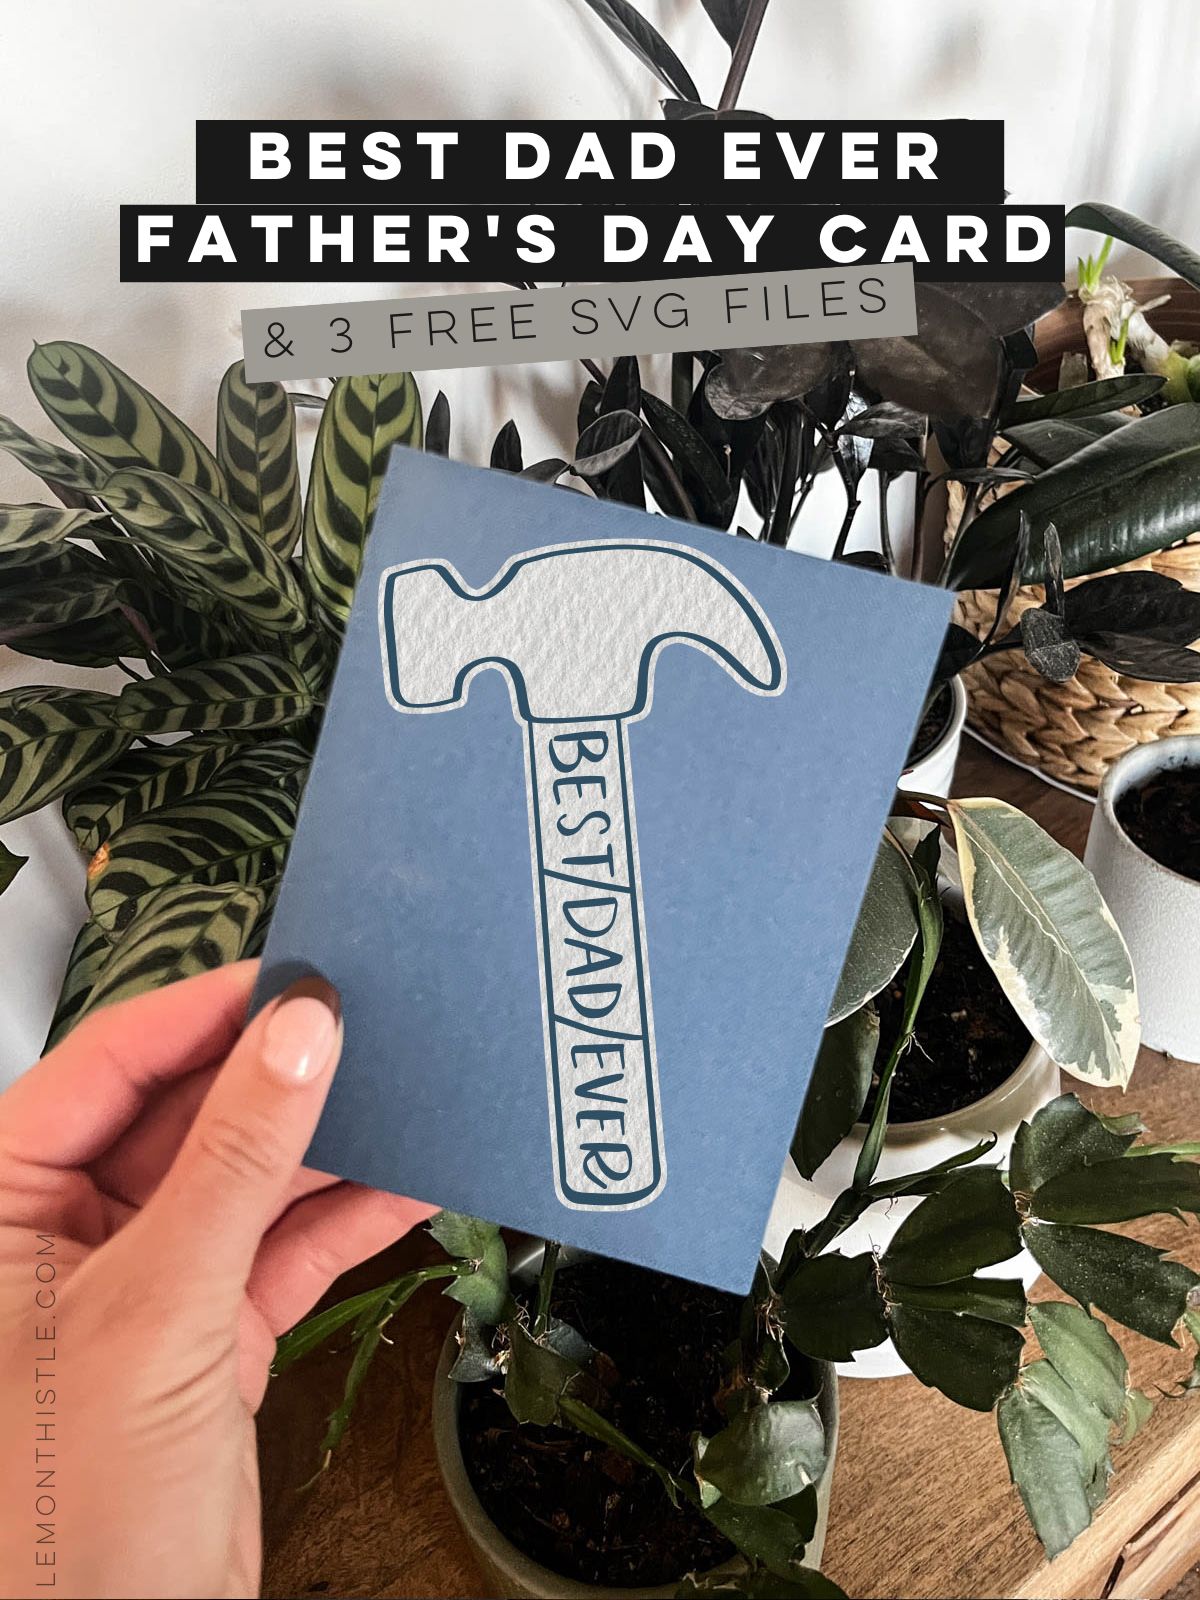 Best Dad Ever hammer card made with cardstock and a free SVG file for fathers day